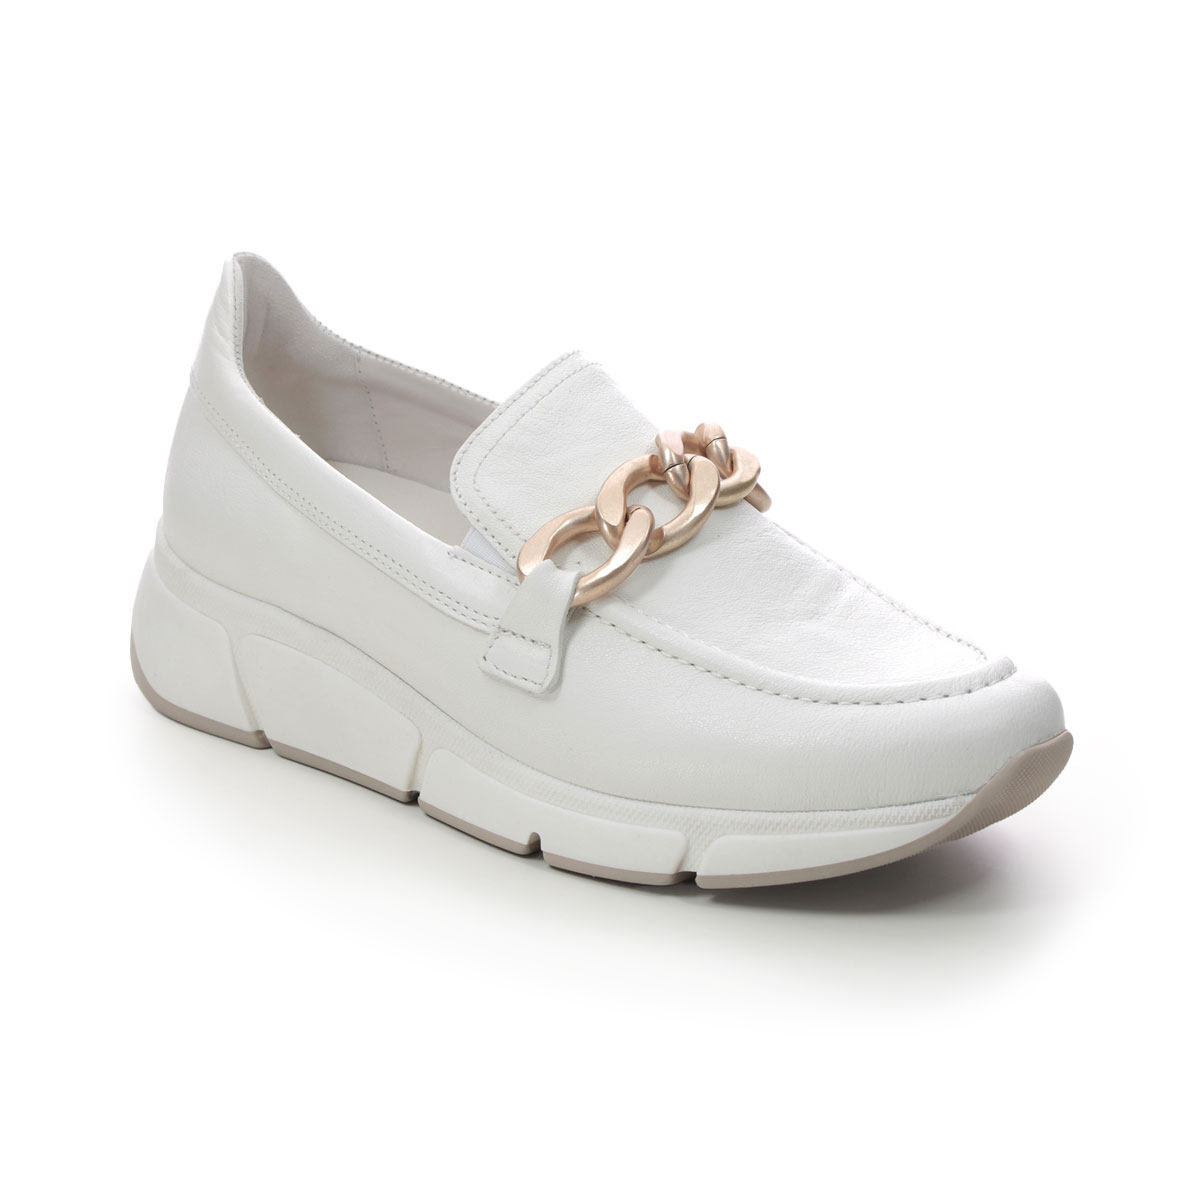 Gabor Factor Trainer Off White Womens loafers 26.485.61 in a Plain Leather in Size 4.5